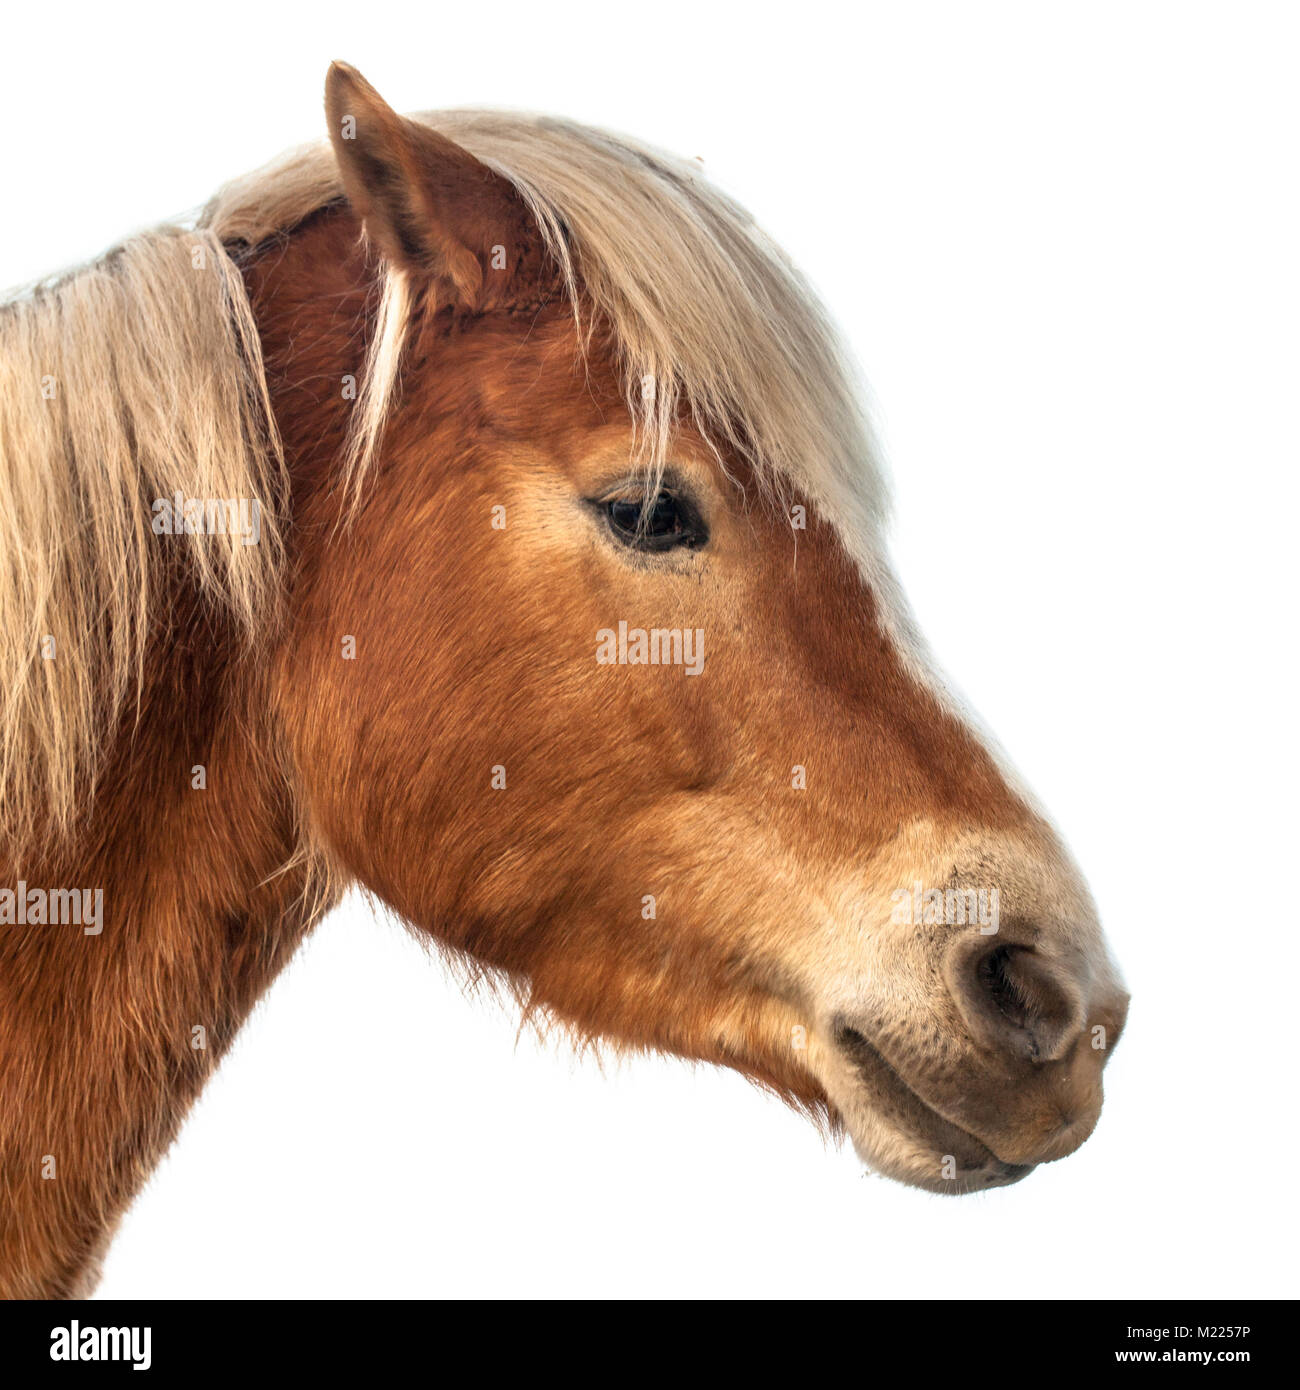 Horse head on white background. A proud animal with prominent colors and brown skin. Stock Photo